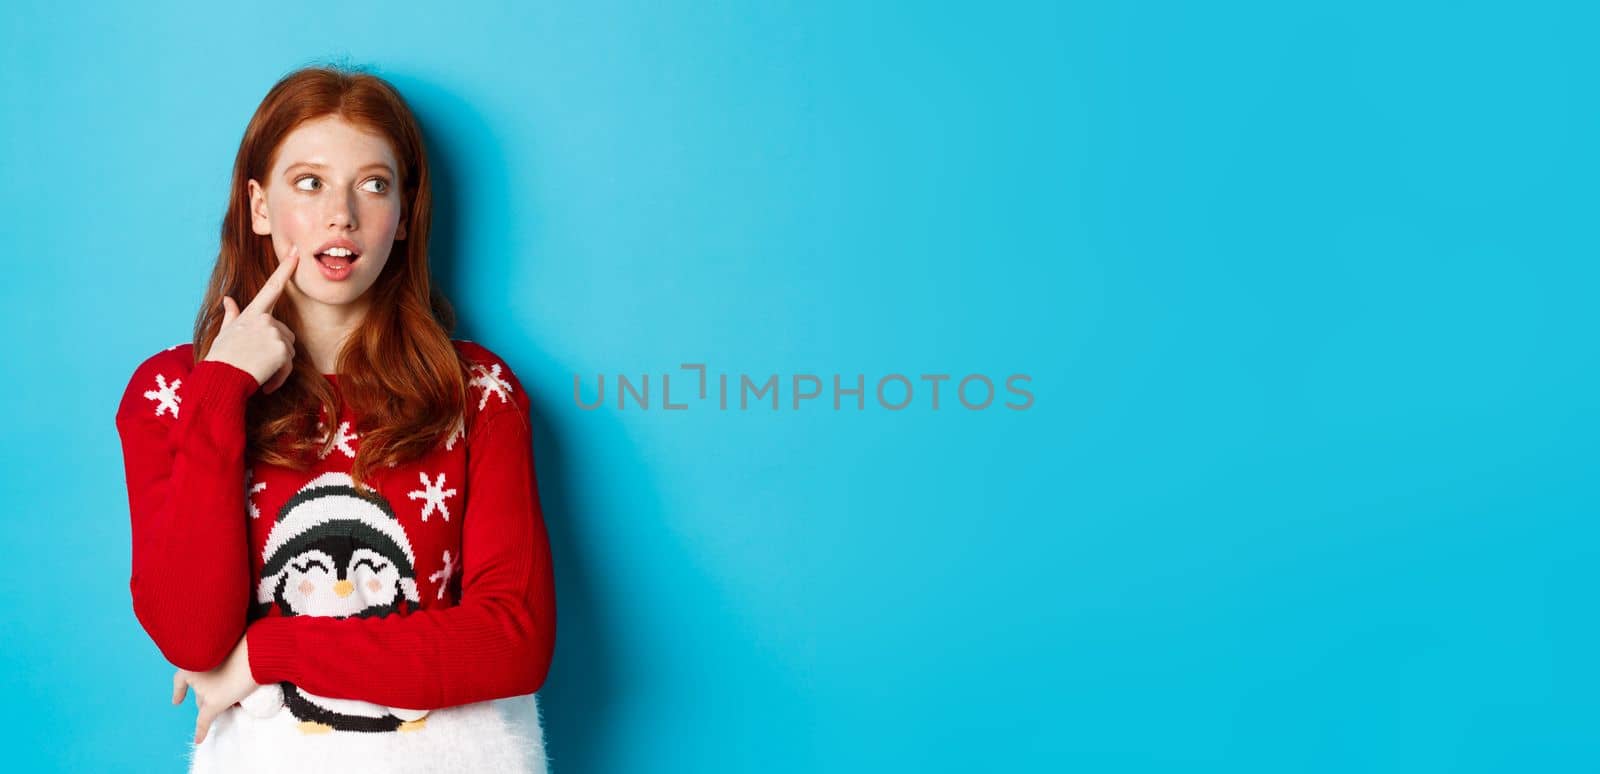 Winter holidays and Christmas Eve concept. Pretty redhead girl in xmas sweater, touching cheek thoughtful and smiling, making choice, looking at upper right corner and thinking, blue background.